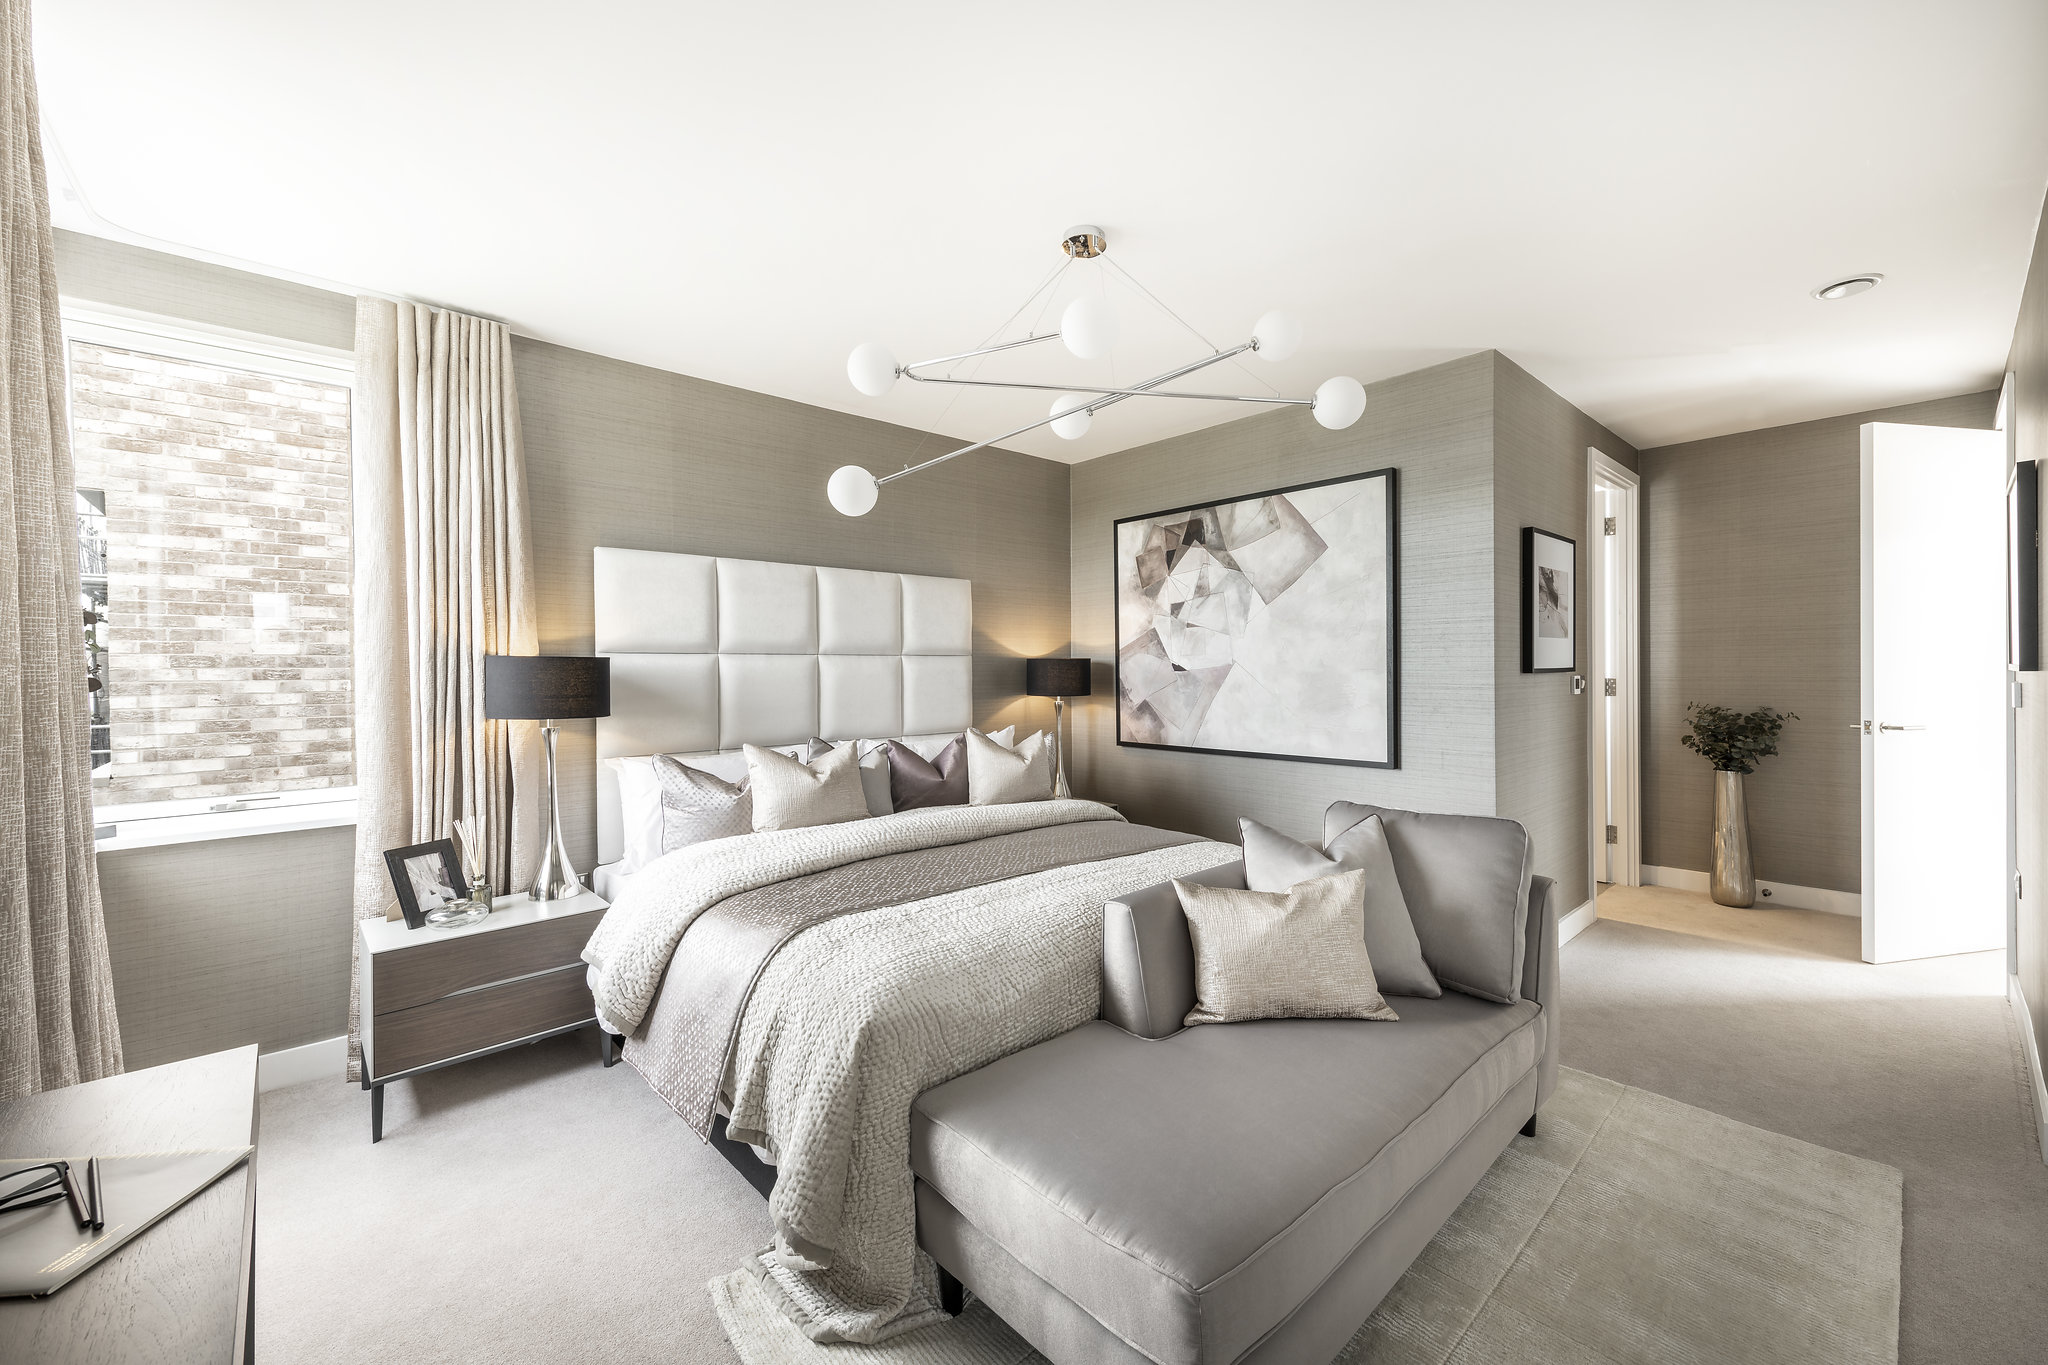 The Avenue - 4 bed show home - master bedroom.jpg